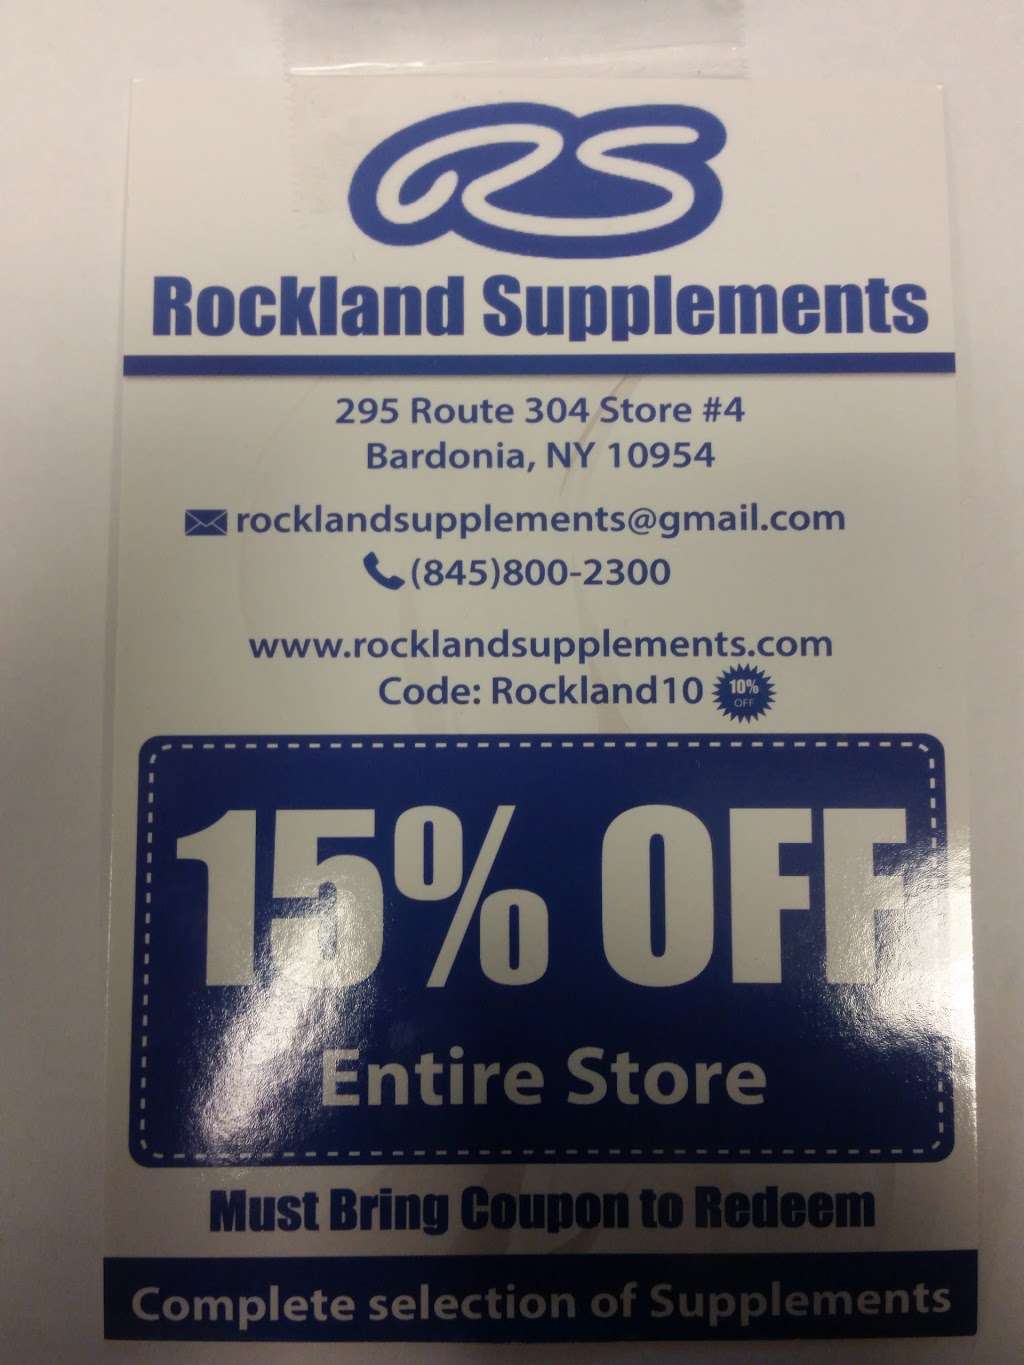 Rockland Supplements | 295 Route 304 Lowr 4, Bardonia, NY 10954 | Phone: (845) 800-2300